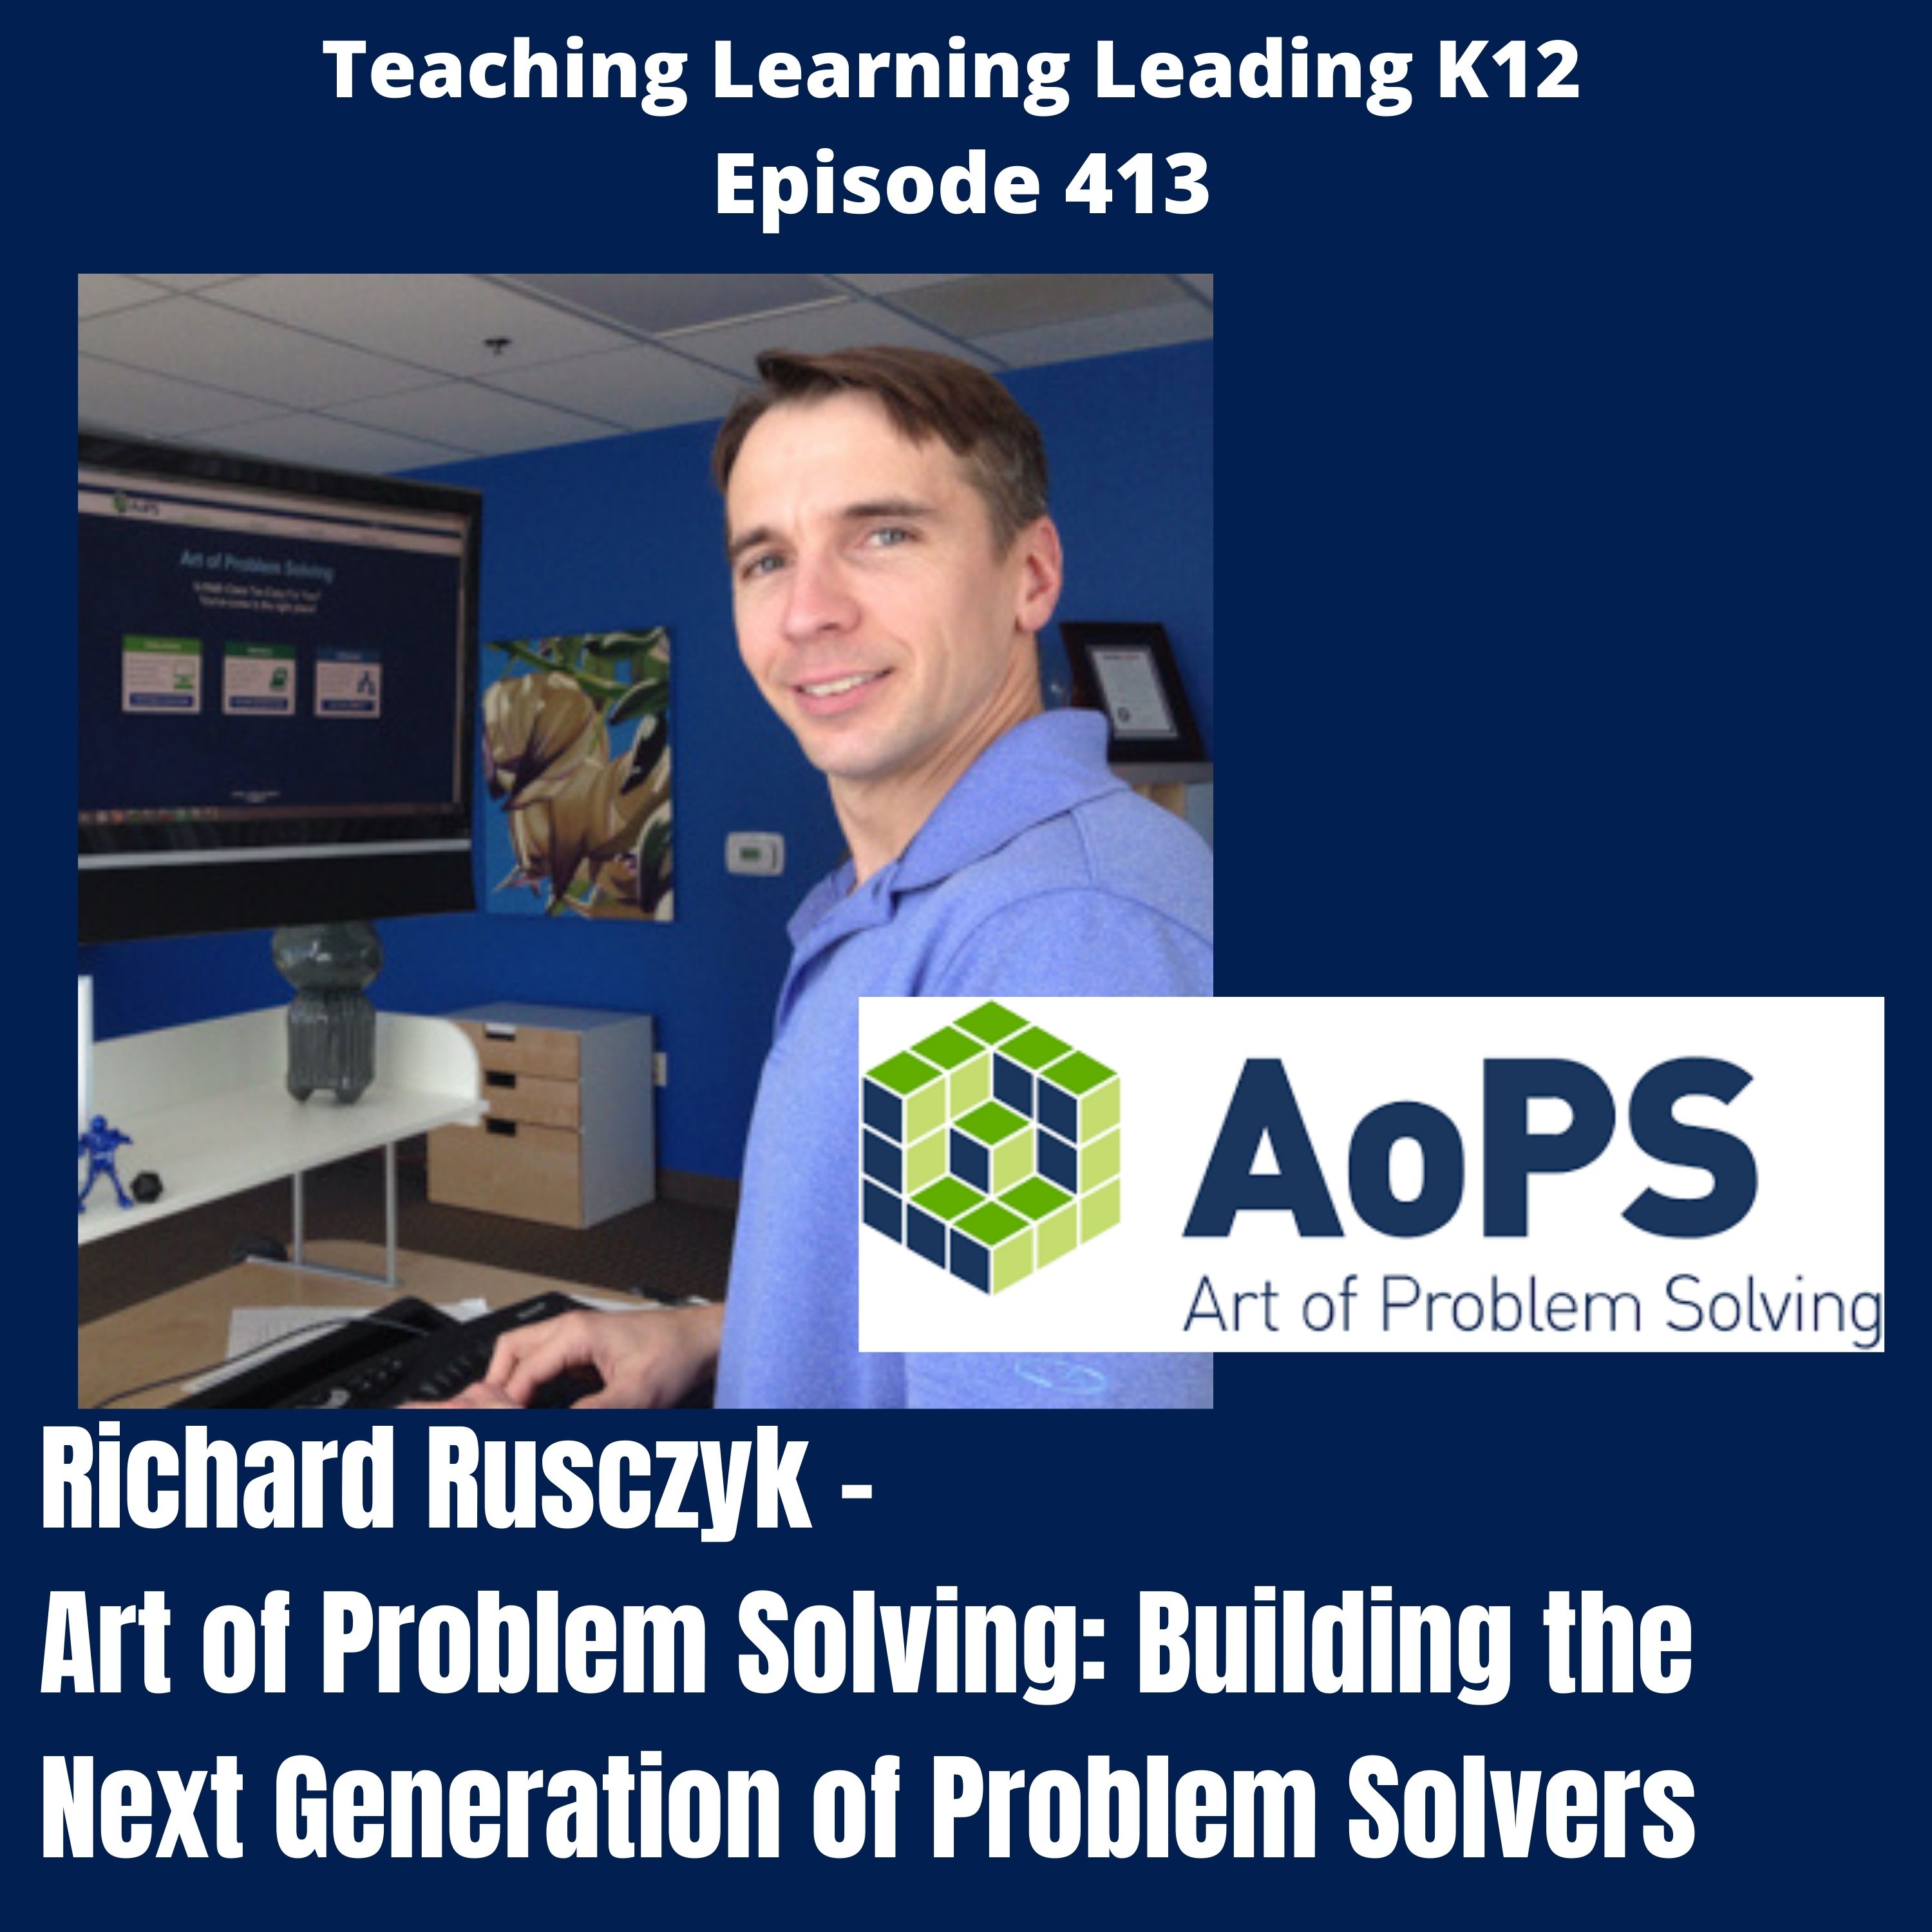 Richard Rusczyk - Art of Problem Solving: Building the Next Generation of Problem Solvers - 413 Image